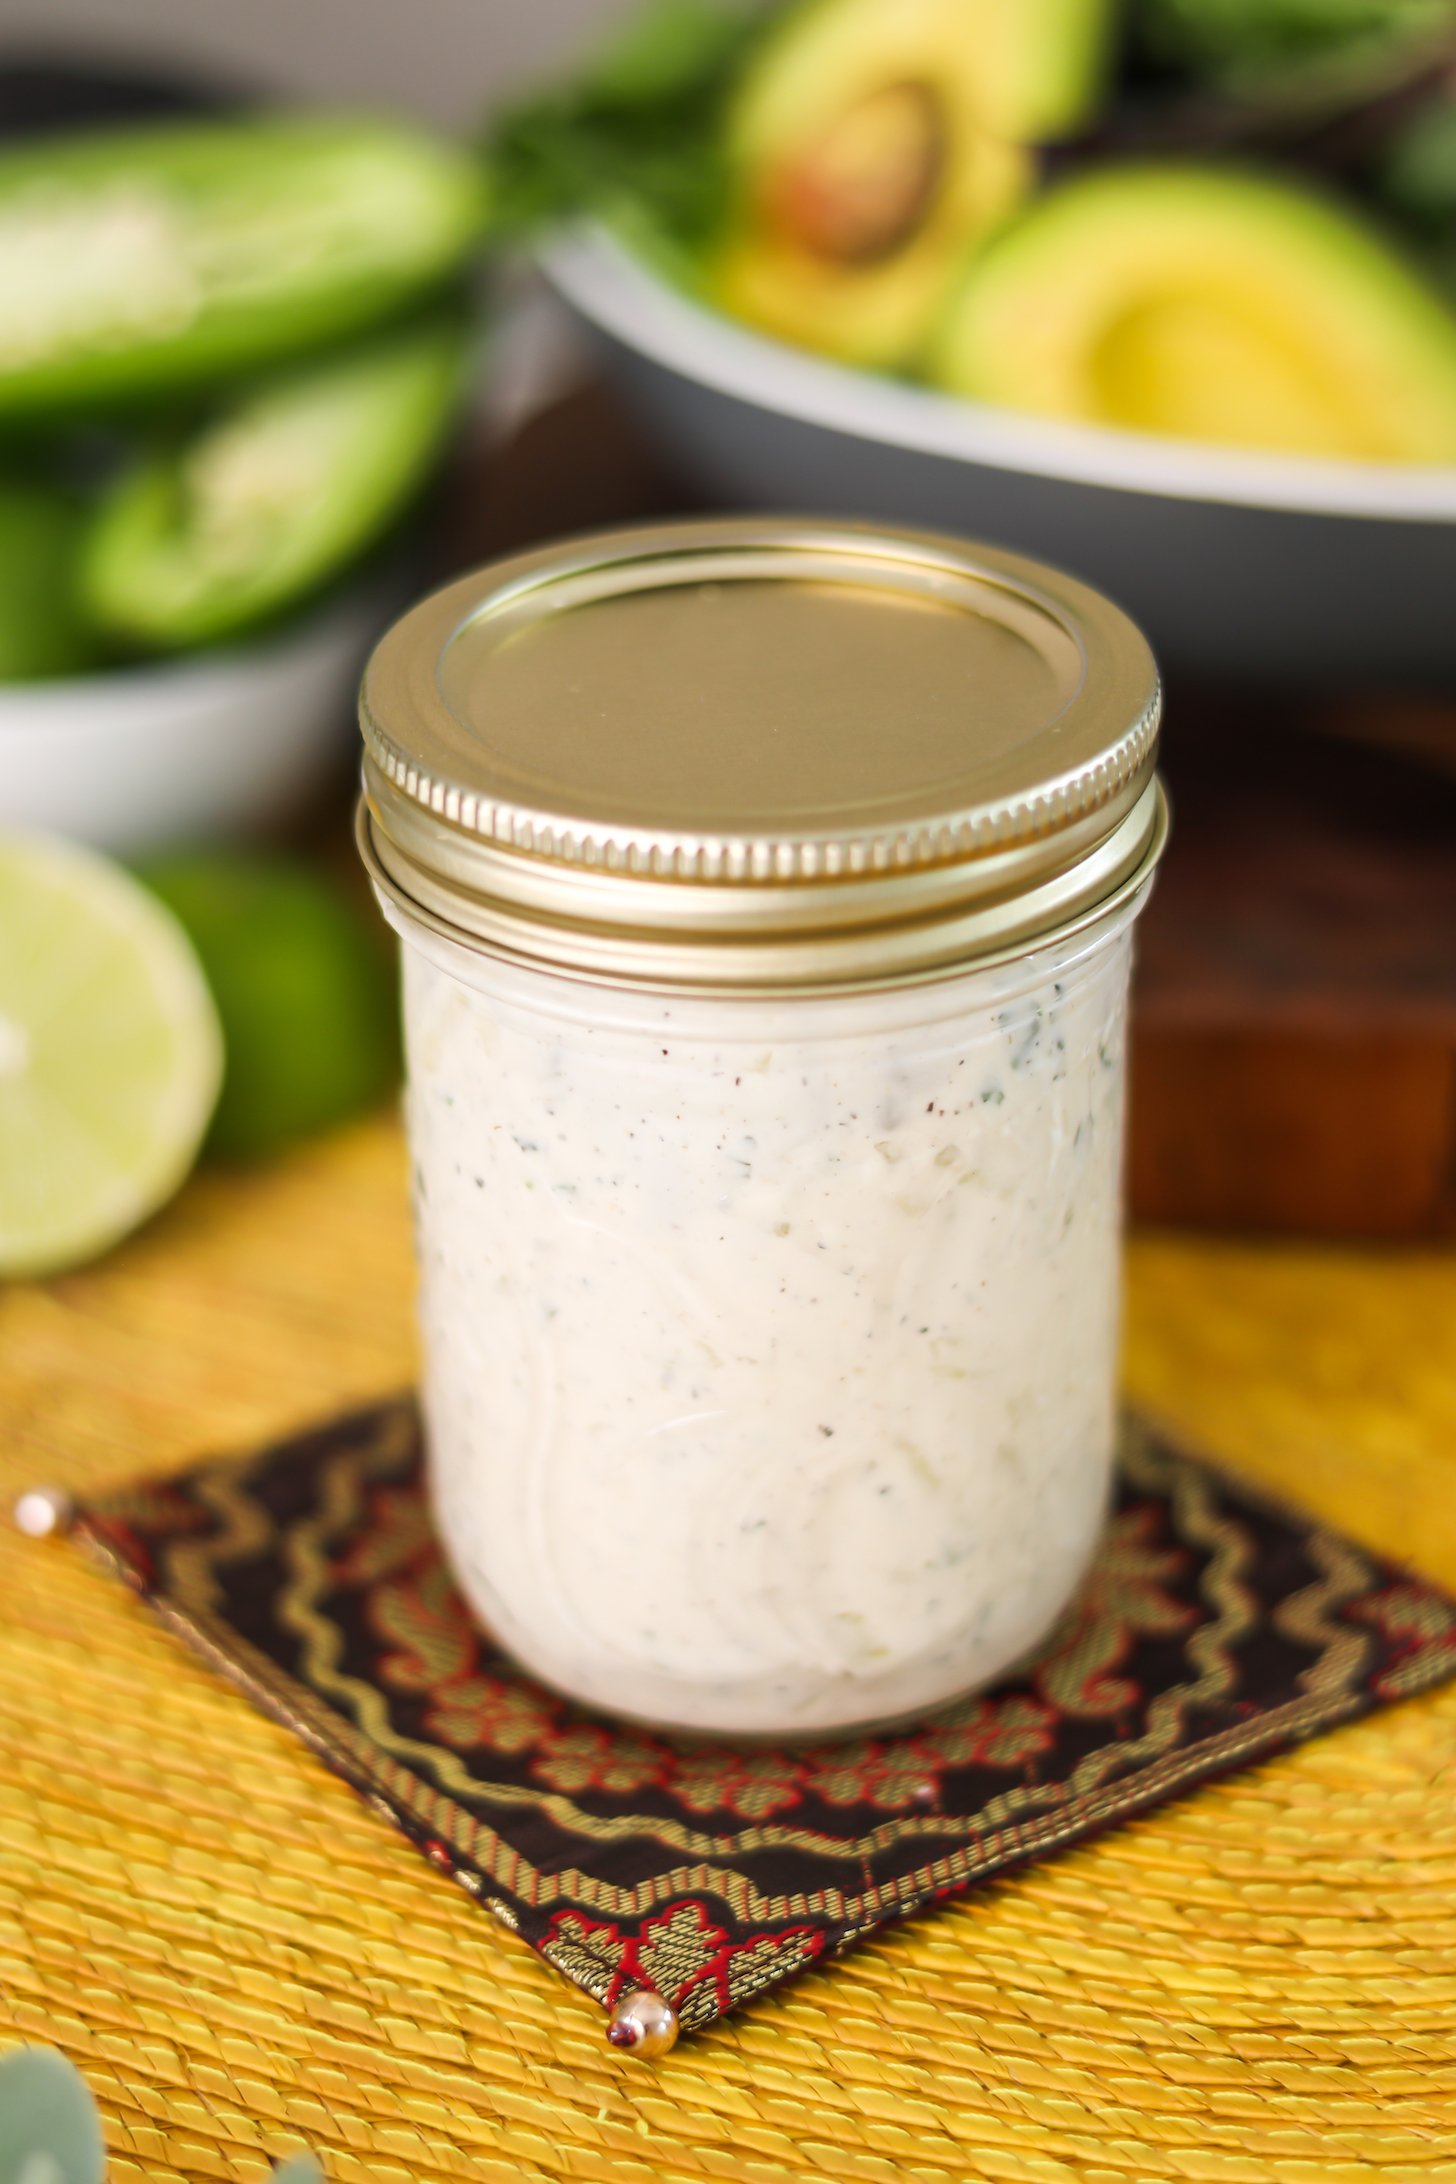 A mason jar with a white sauce in it on a decorative place mat.